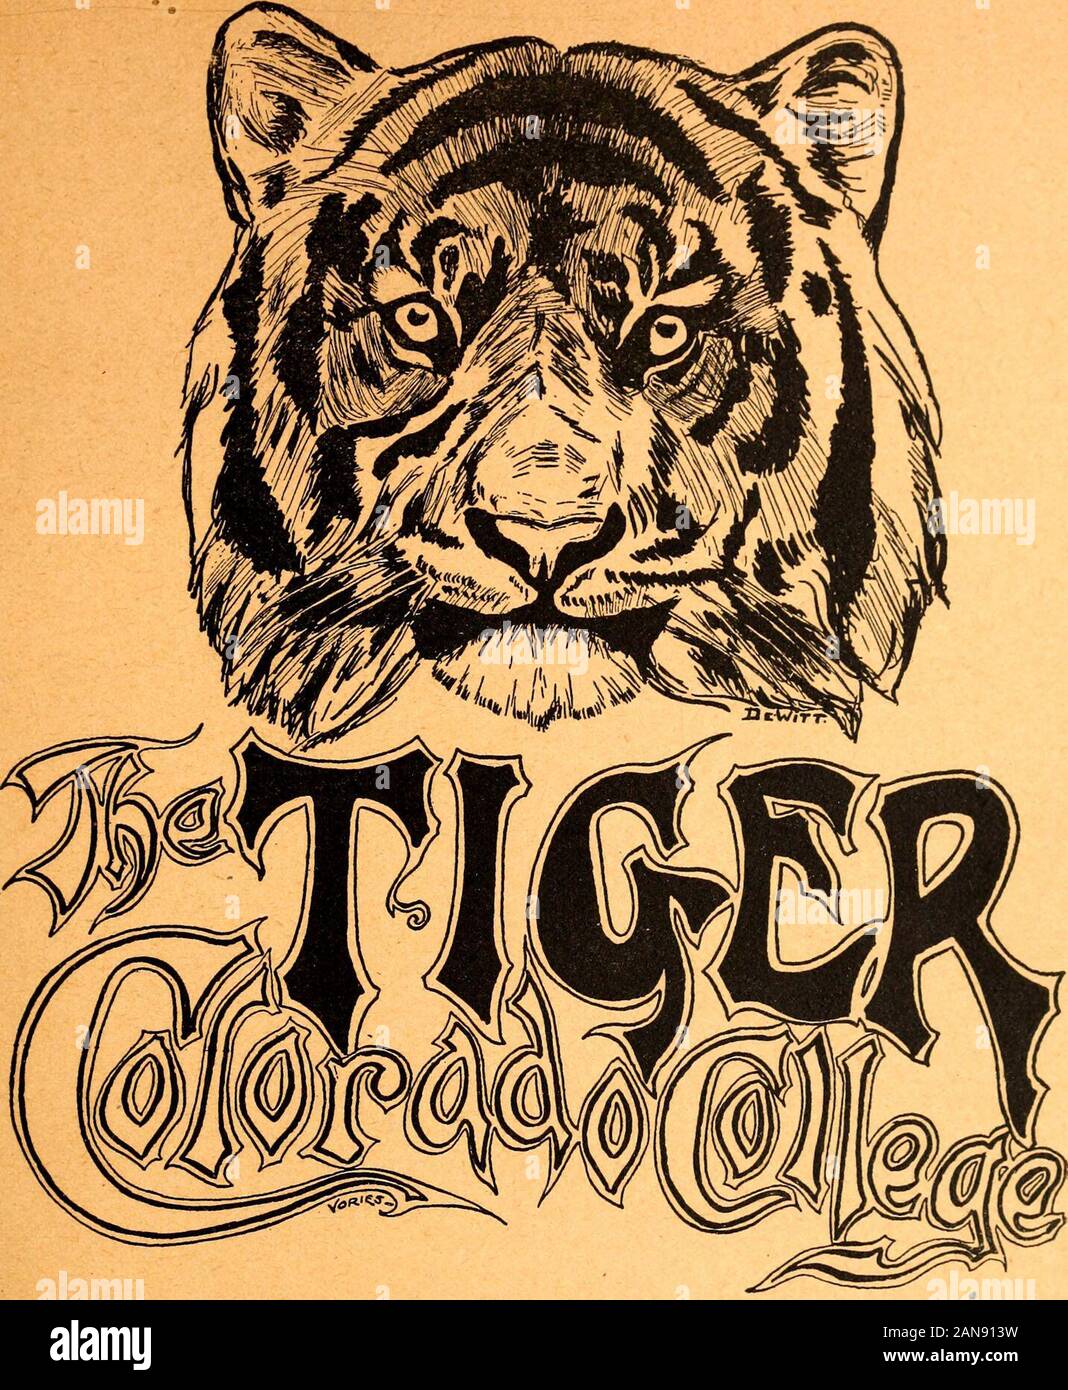 The Tiger (student newspaper), Sept1903-June 1904 . 113 EASr KIOWA STREET :: O. E. HEMENWAY Groceries and Meats 115 S. Tejon St., COLORADO SPRINGS, COLO. inn i n t **»»?! H-i i in huhihiiiii m»»m mi 1111 inrn in n 11111 n 111*.. September 231903 Volume VI Nvjmbei 2 I; Special Rates to Students THE KNIGHT-CAMPBELL Music Company .. NEW LENNOX BLOCK ? nT«»T»»T»«tnTinTi»TitT«iT«AiT..t.«T««Tnt«ifiitnTi 1T1 iti »»»»»» -•--«-•- -»• •»- -»- -»- -r • 4 4 I • I • * F Mr V 1 4 V ?????W^^ ON RENTED PIANOS OPPOSITE NORTH PARK St. John Bros.,PRACTICALPLlMBtRS GAS &lt;AND STEAM FITTERS Hot Water Heating a Sp Stock Photo